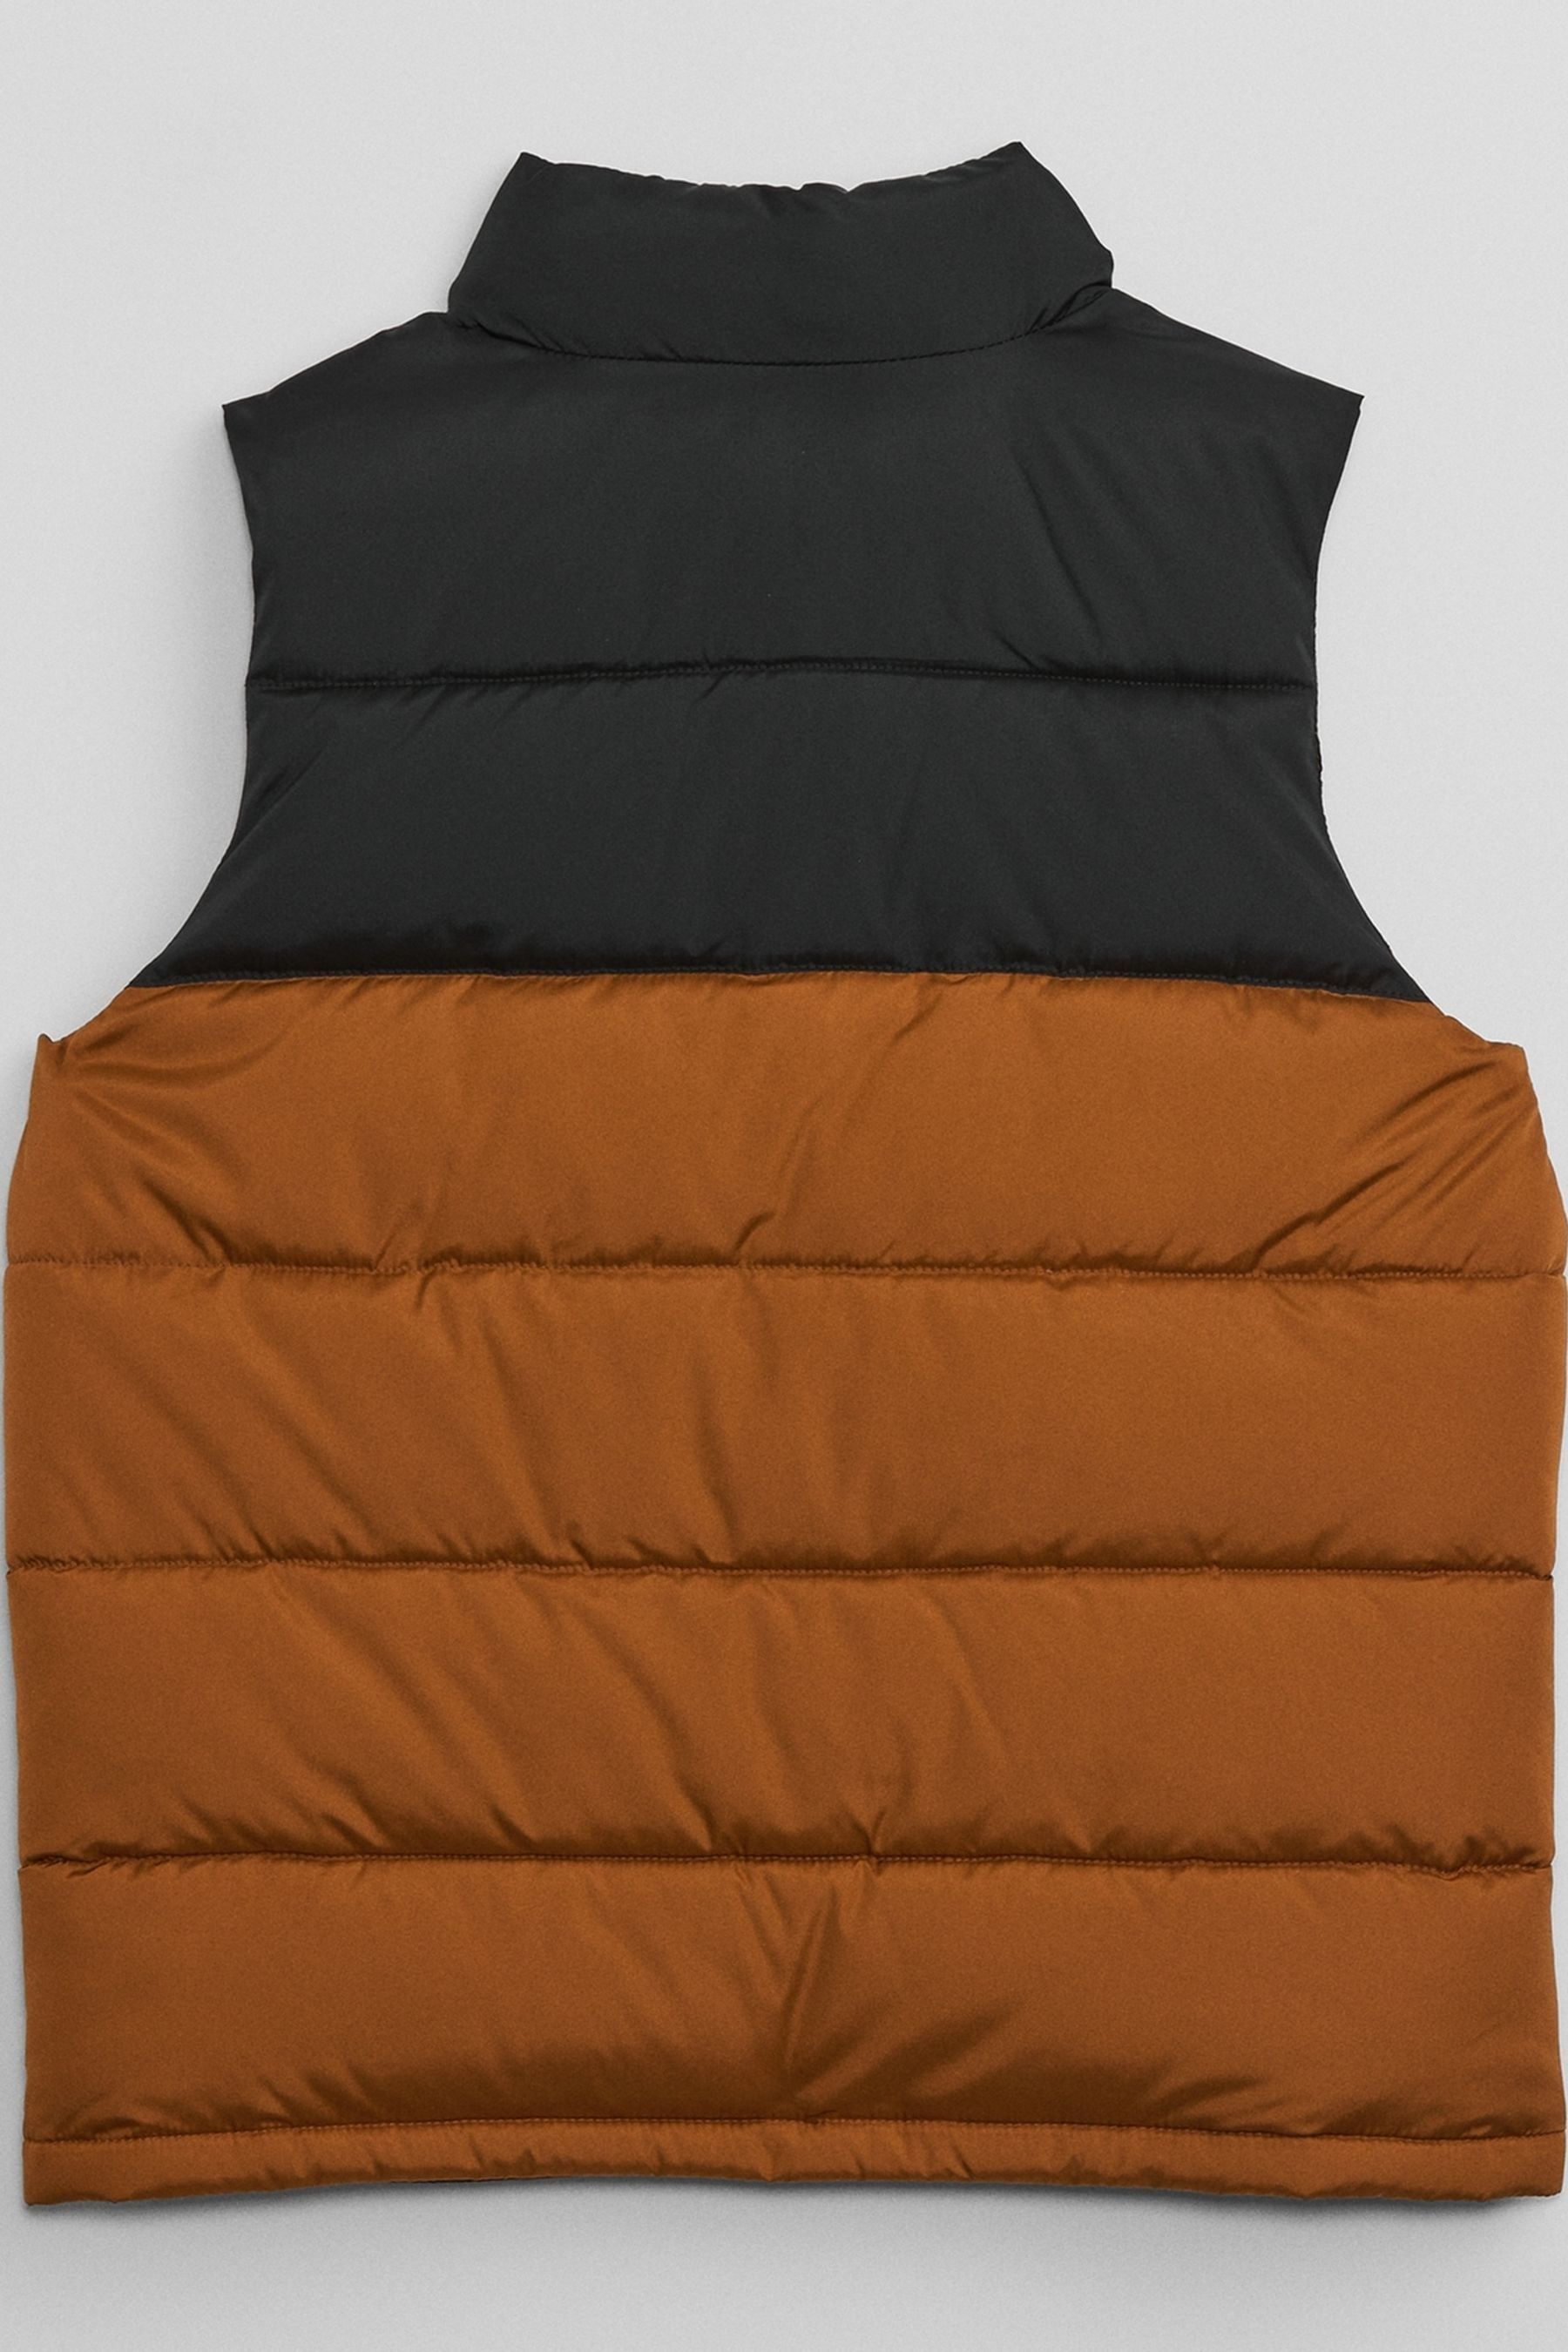 Buy Gap Cold Control Puffer Sleeveless Gilet from the Gap online shop